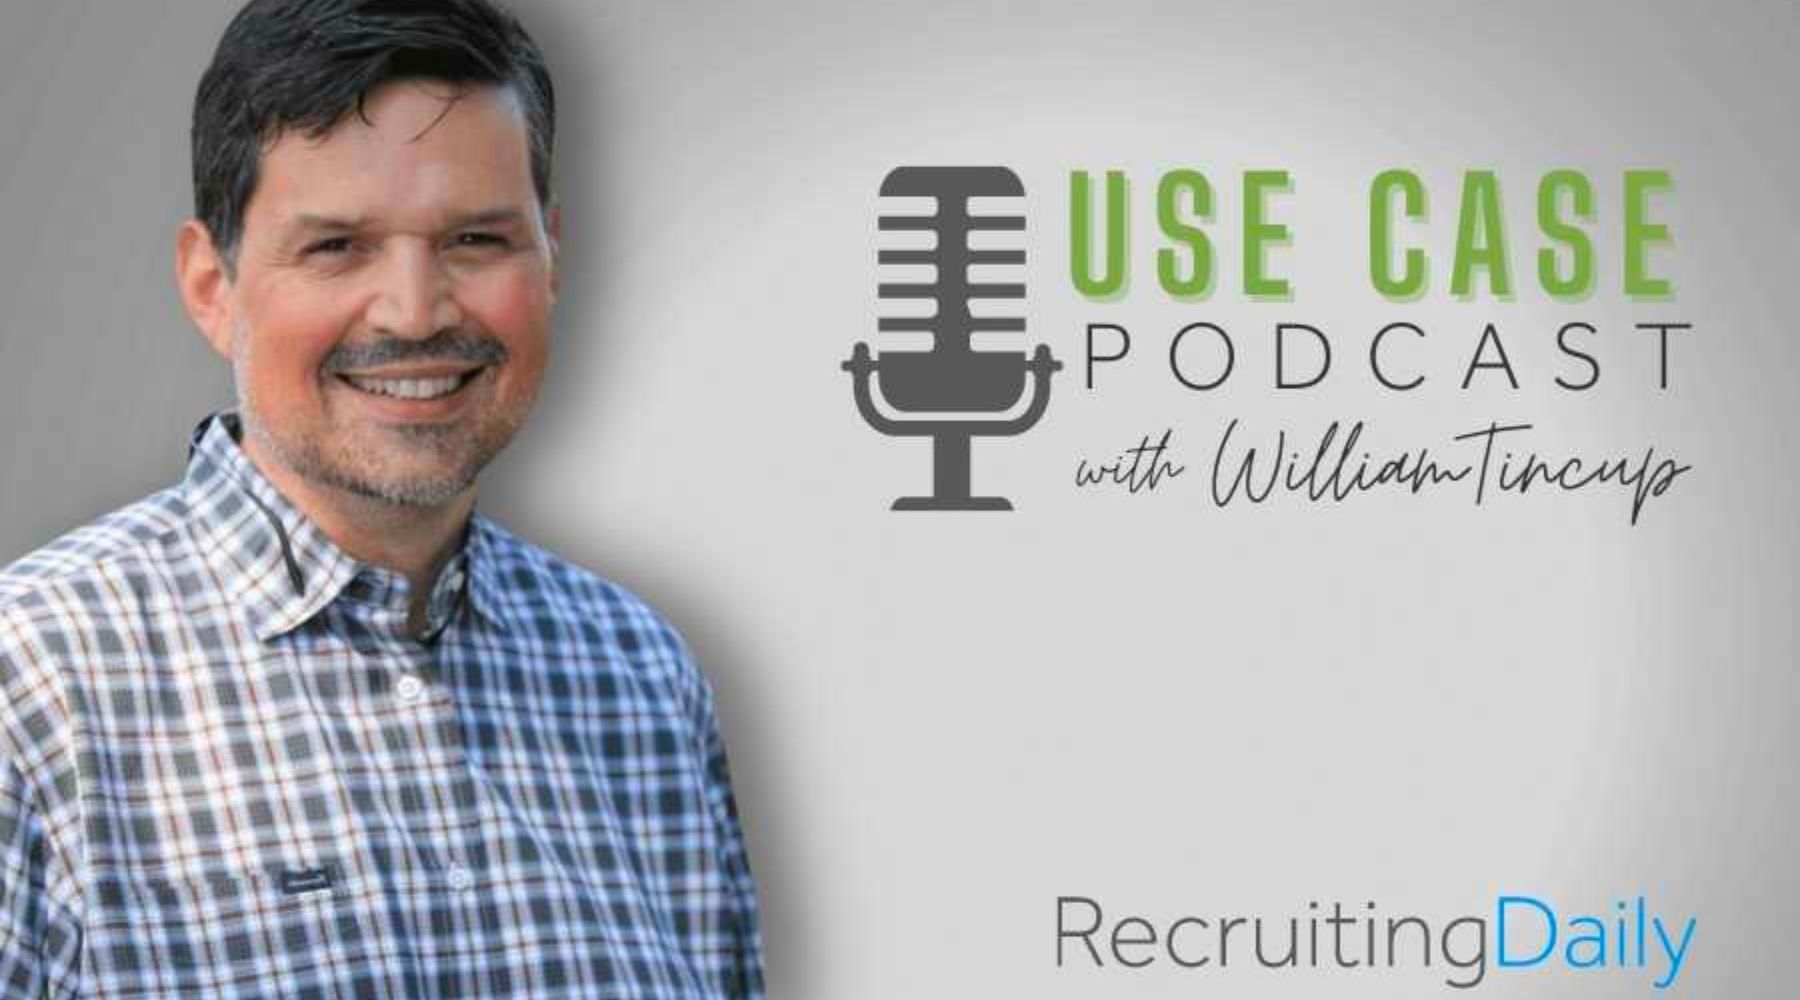 Adam Wray + The Use Case Podcast